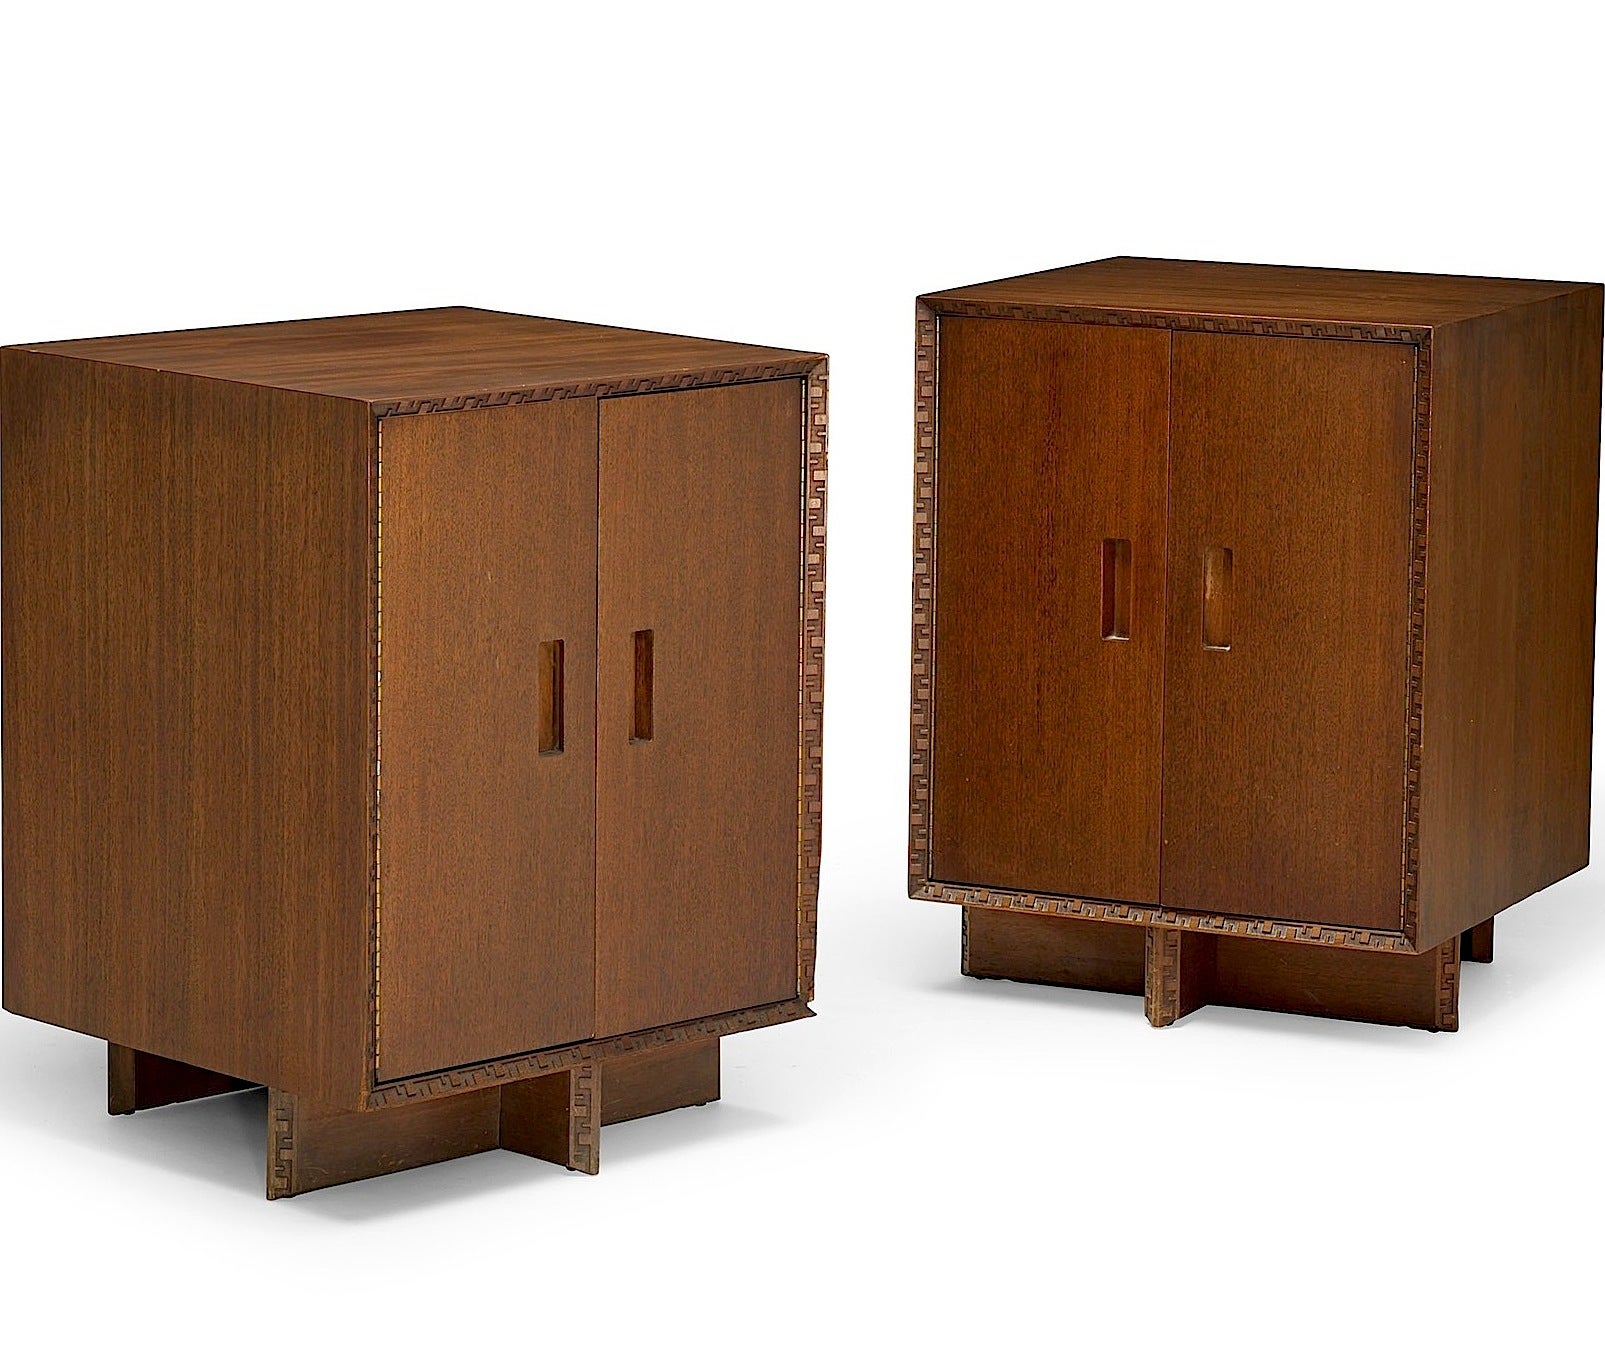 Night Stands by Frank Lloyd Wright